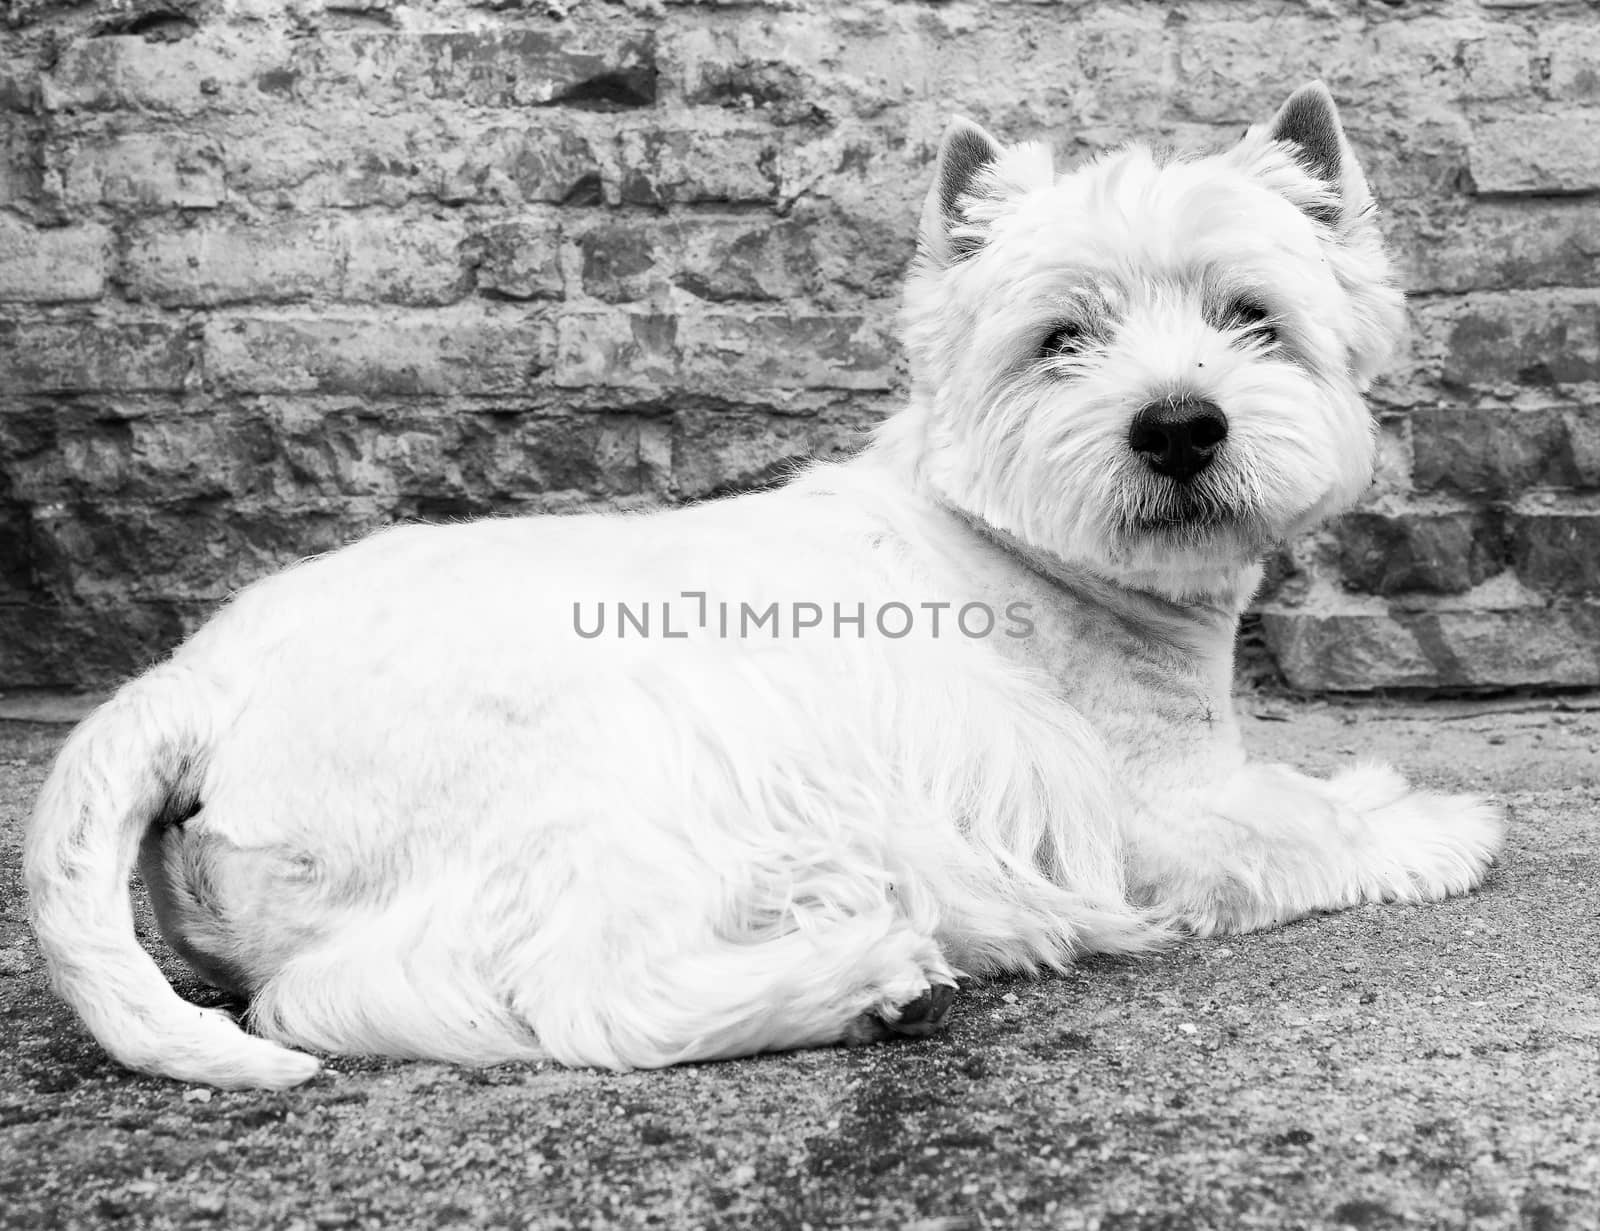 West Highland White Terrier sitting at the old brick wall. Nice contrast  of the dog hairs and contour of bricks. by rdonar2